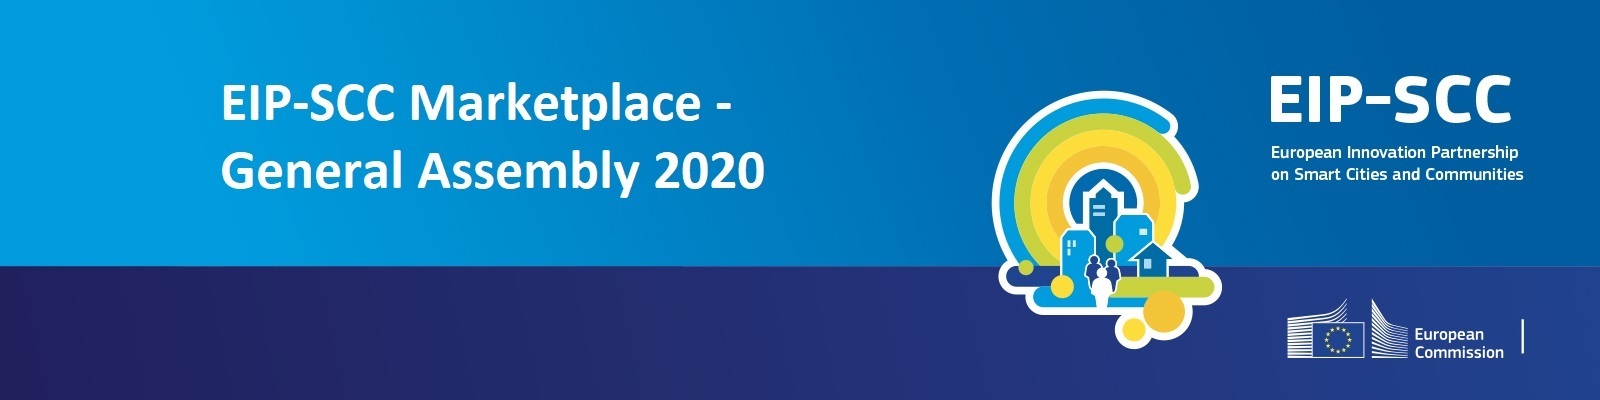 EIP-SCC Marketplace - General Assembly 2020